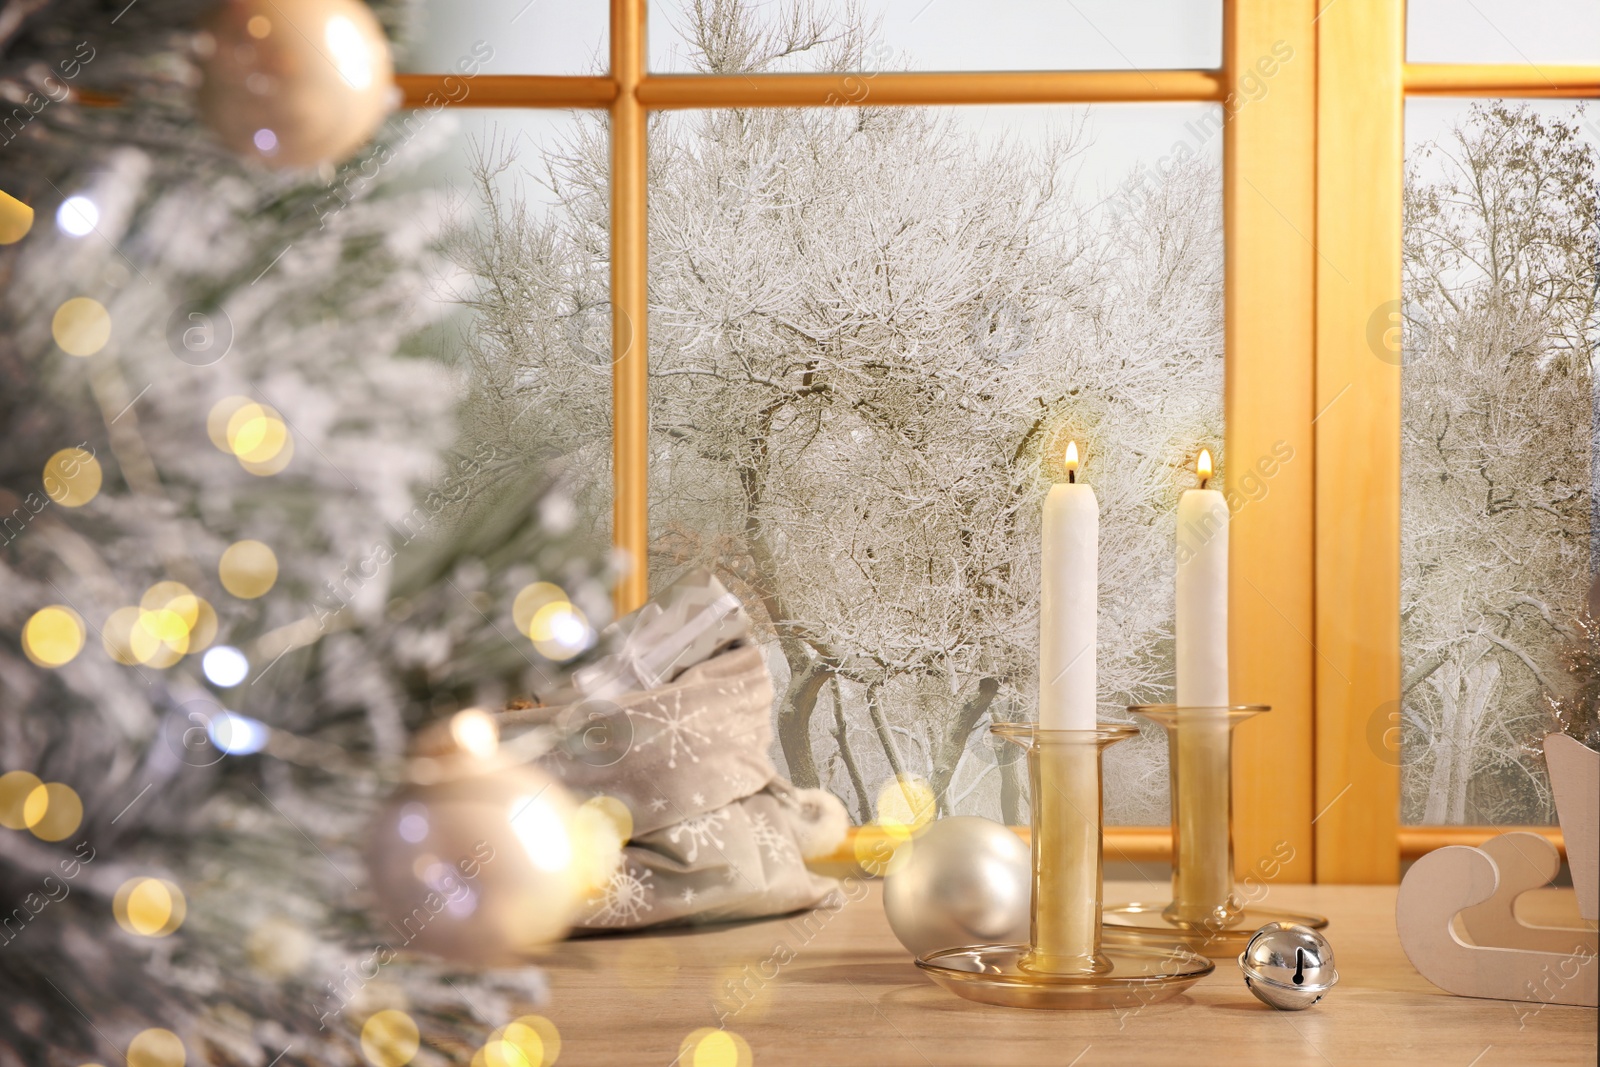 Image of Burning candles and festive decor on window sill near Christmas tree indoors